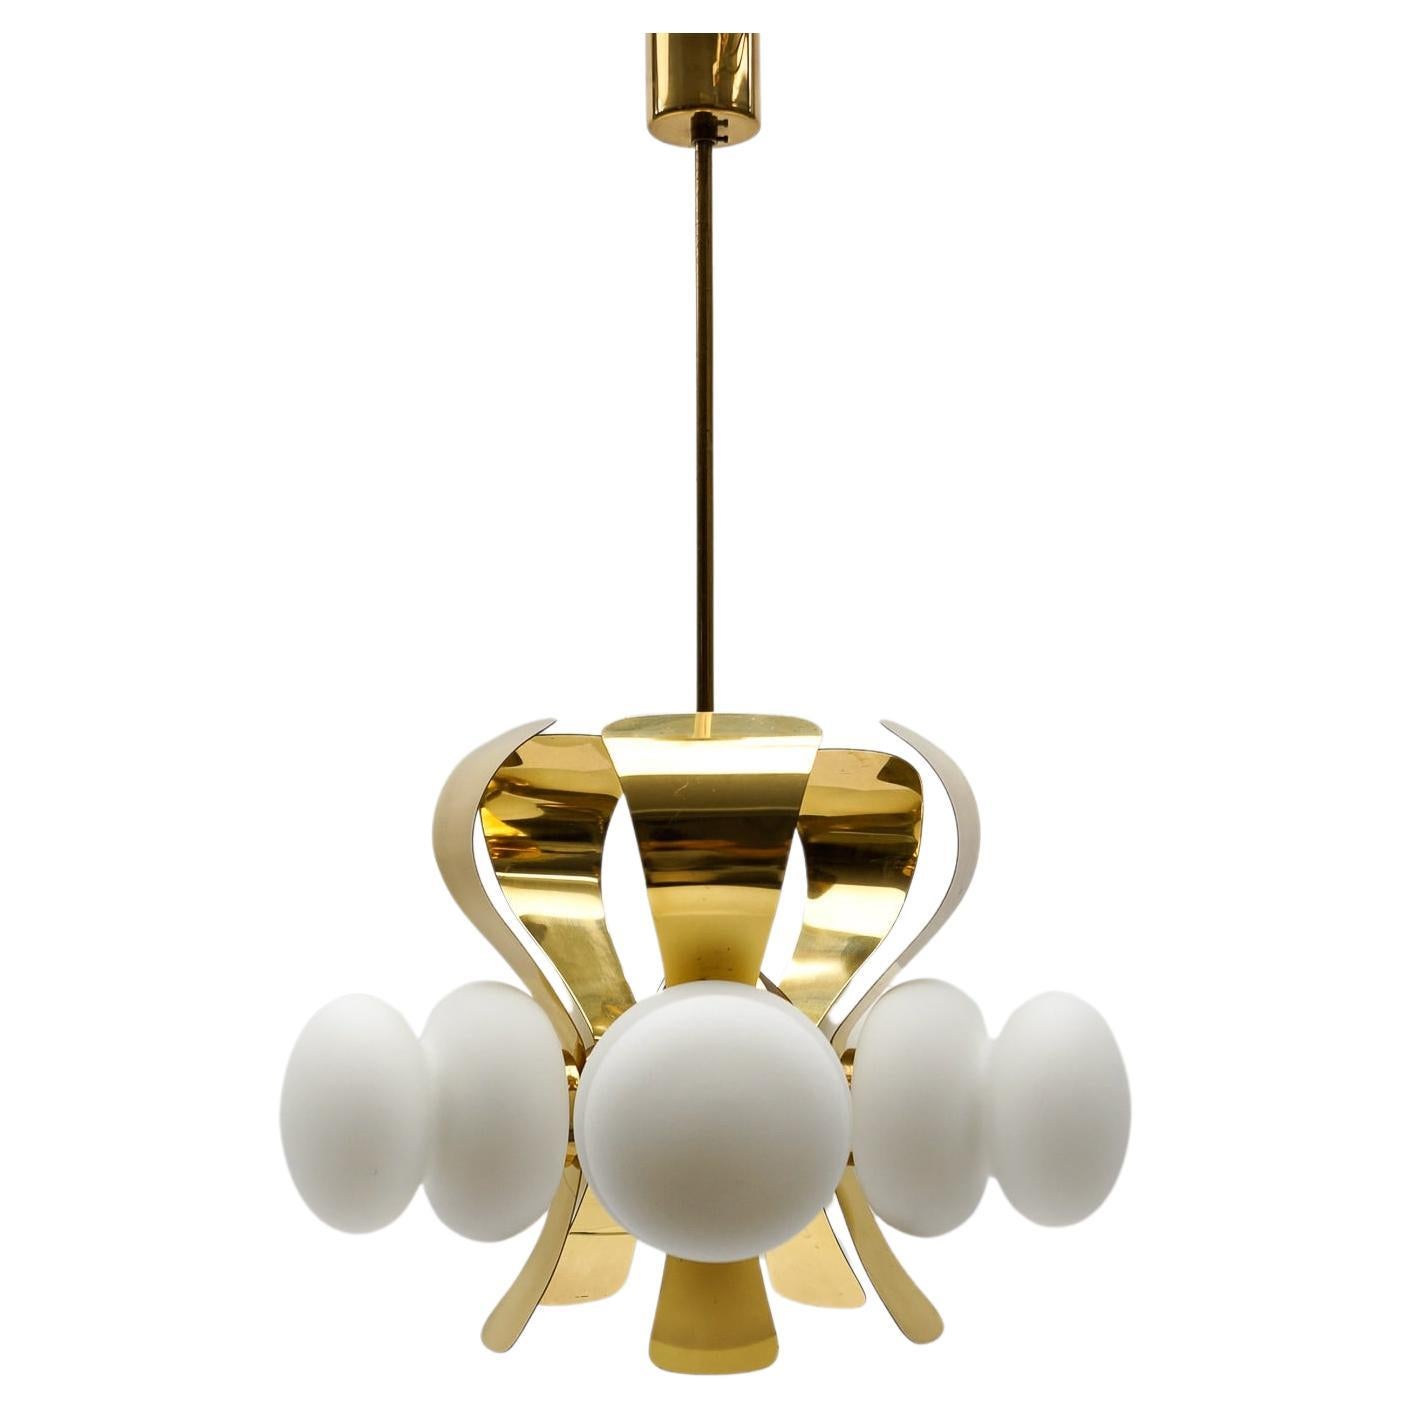 Very Rare Mid-Century Modern 5-Arm Orbit Lamp in Gold and Opaline Glass, 1960s For Sale